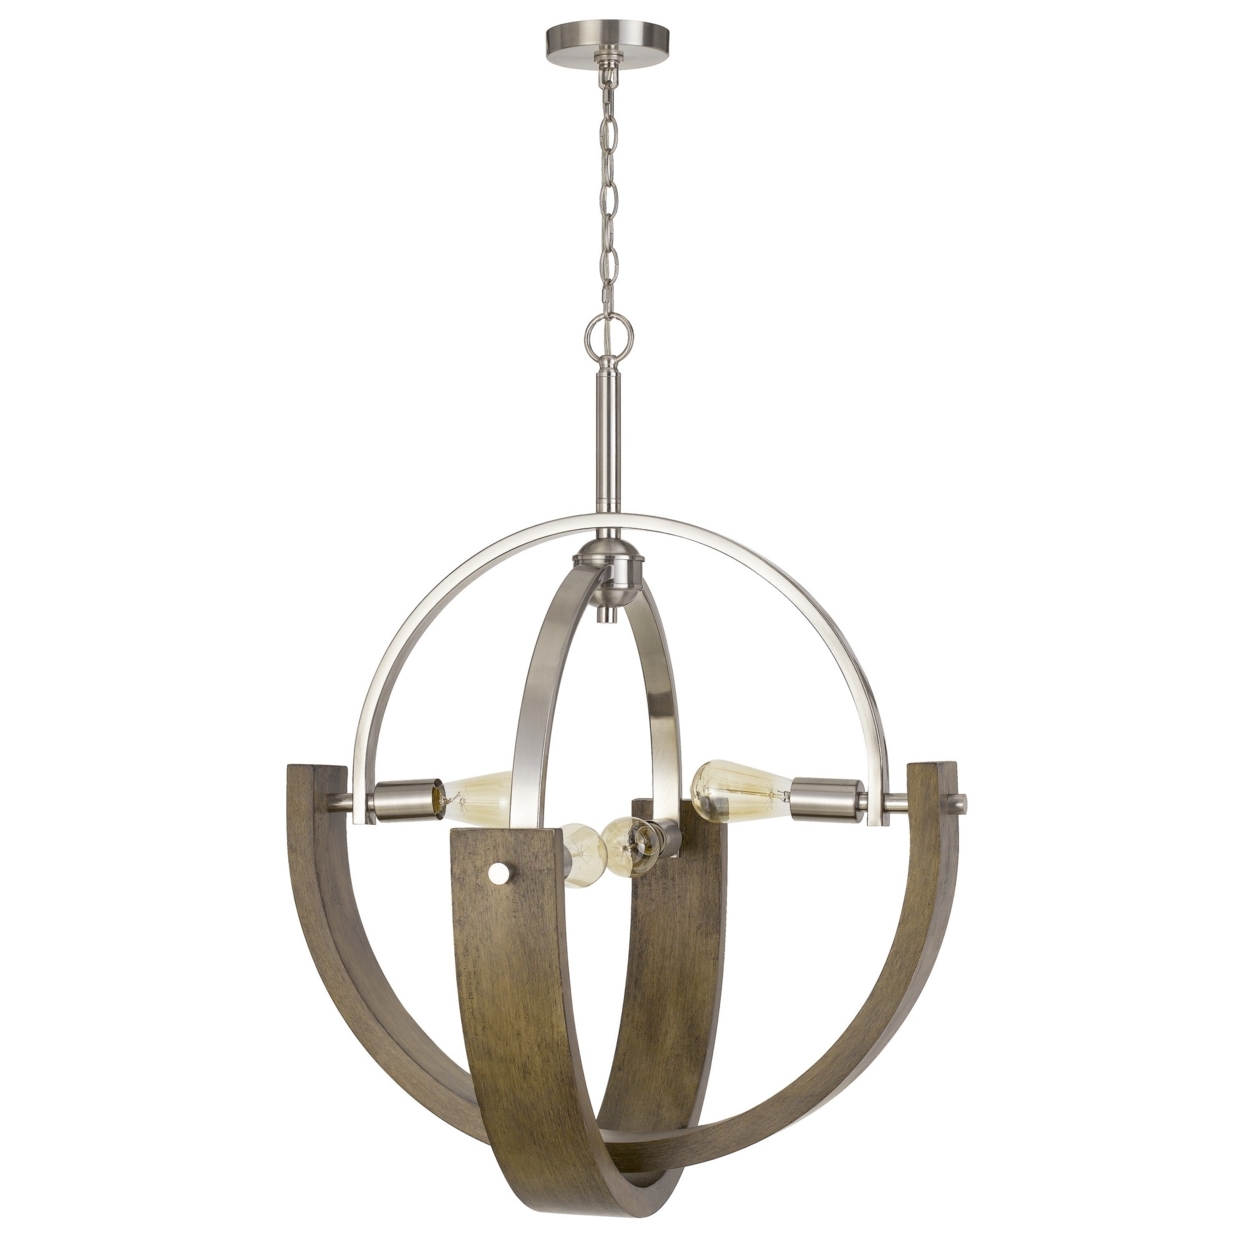 4 Bulb Metal And Wooden Chandelier, Silver And Brown- Saltoro Sherpi